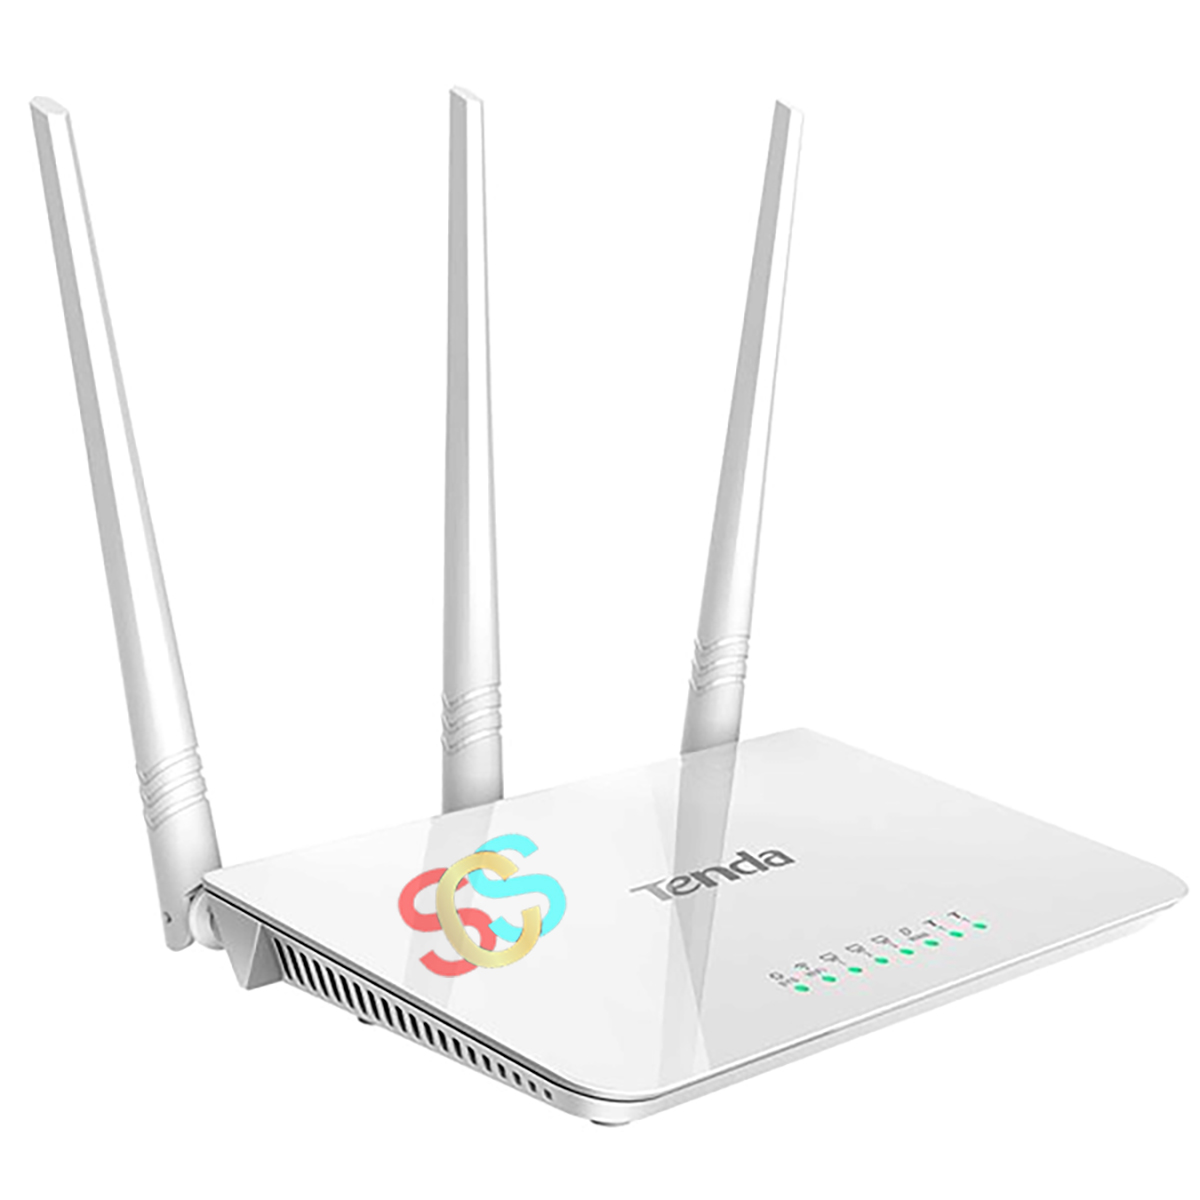 Tenda F3 300 Mbps Ethernet Single-Band Wi-Fi Router